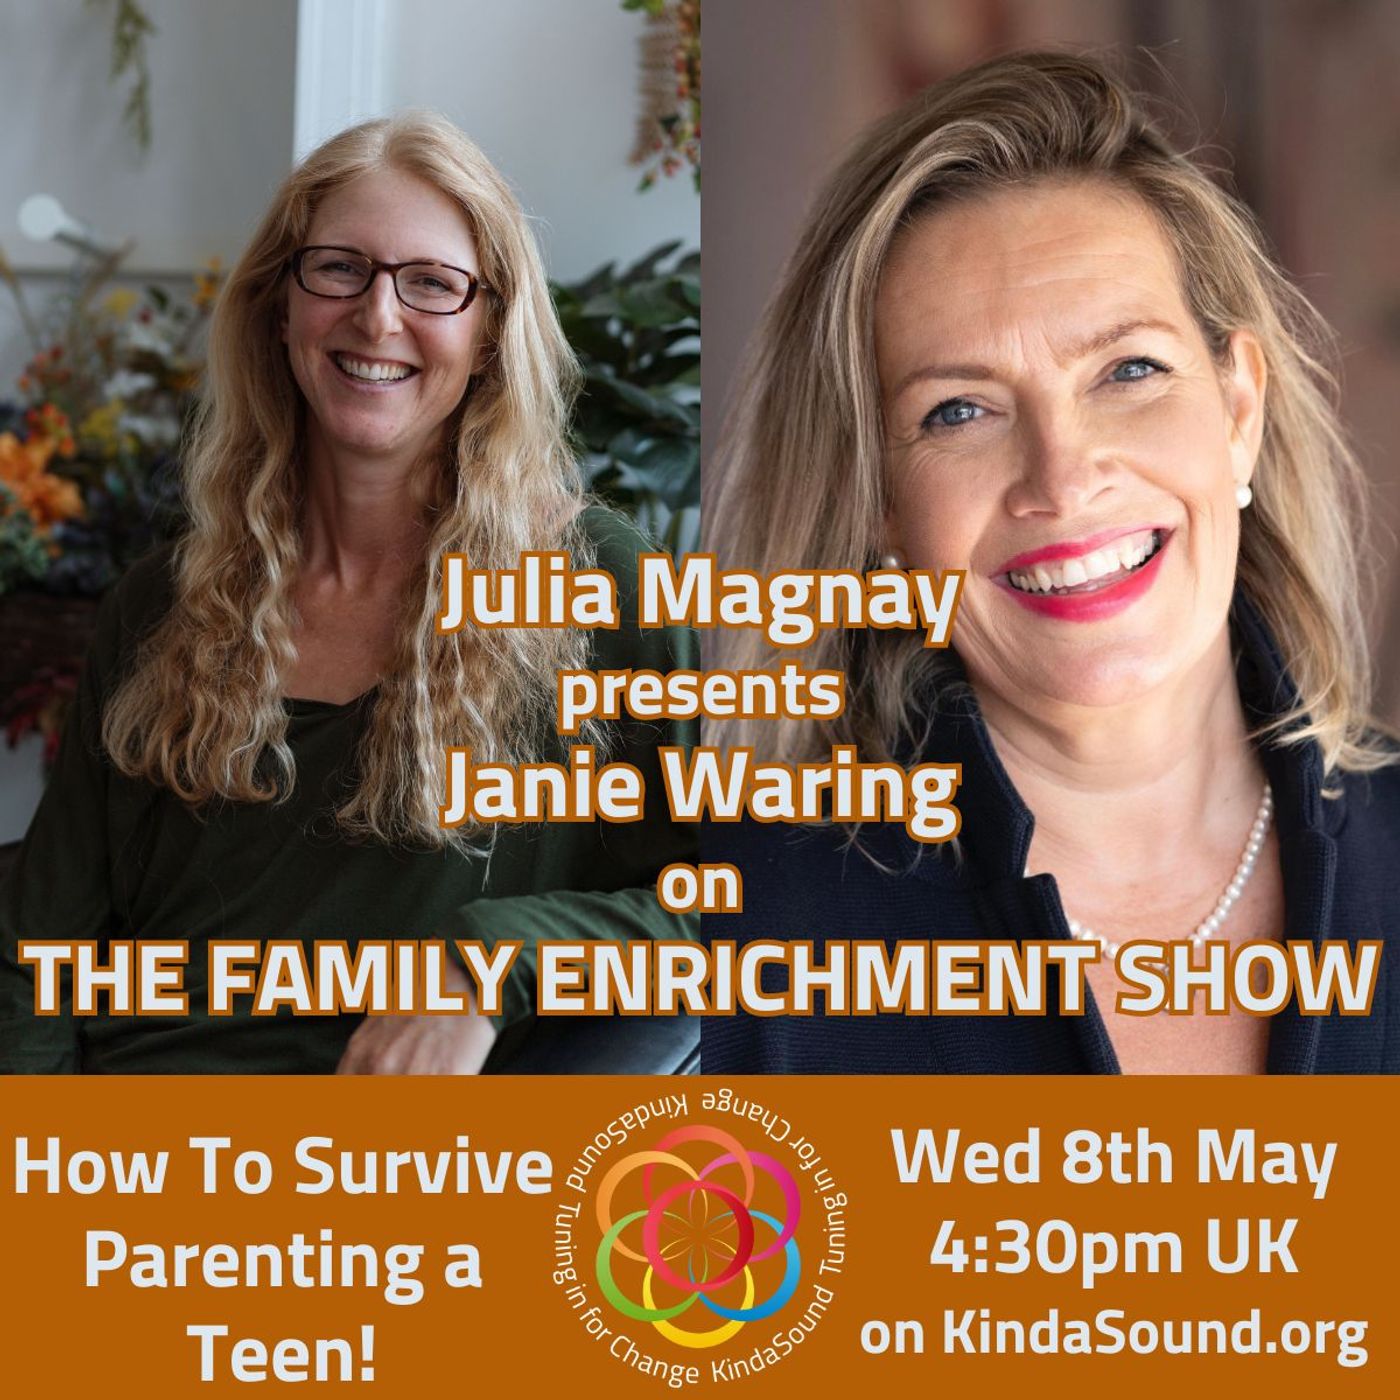 How to Survive Parenting a Teen | Janie Waring on The Family Enrichment Show with Julia Magnay